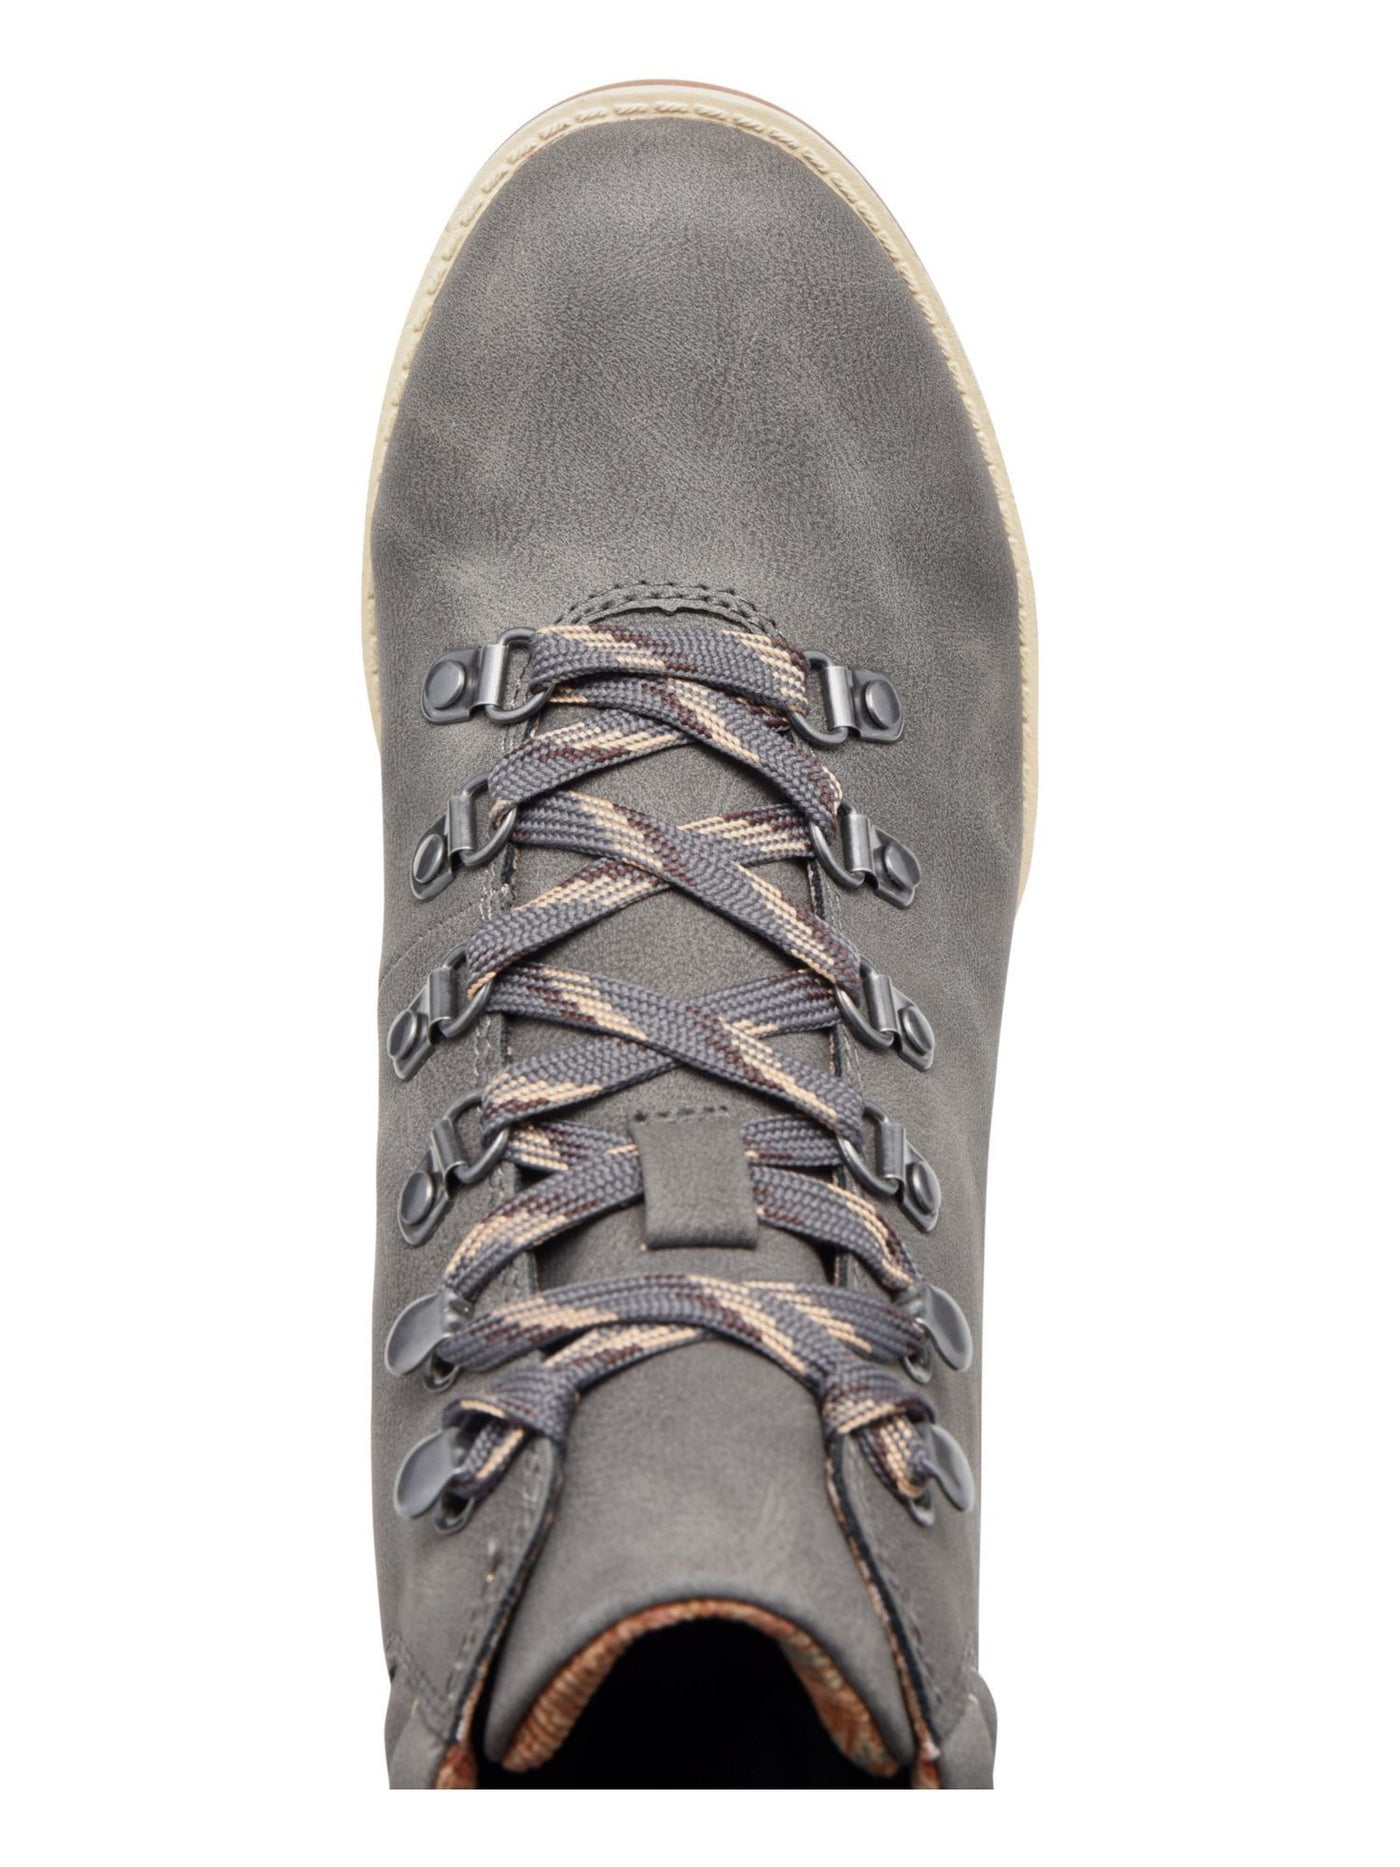 BOC Womens Gray Floral Inside Padded Cuff Hiker-Inspired Cushioned Alder Round Toe Block Heel Lace-Up Booties 9.5 M